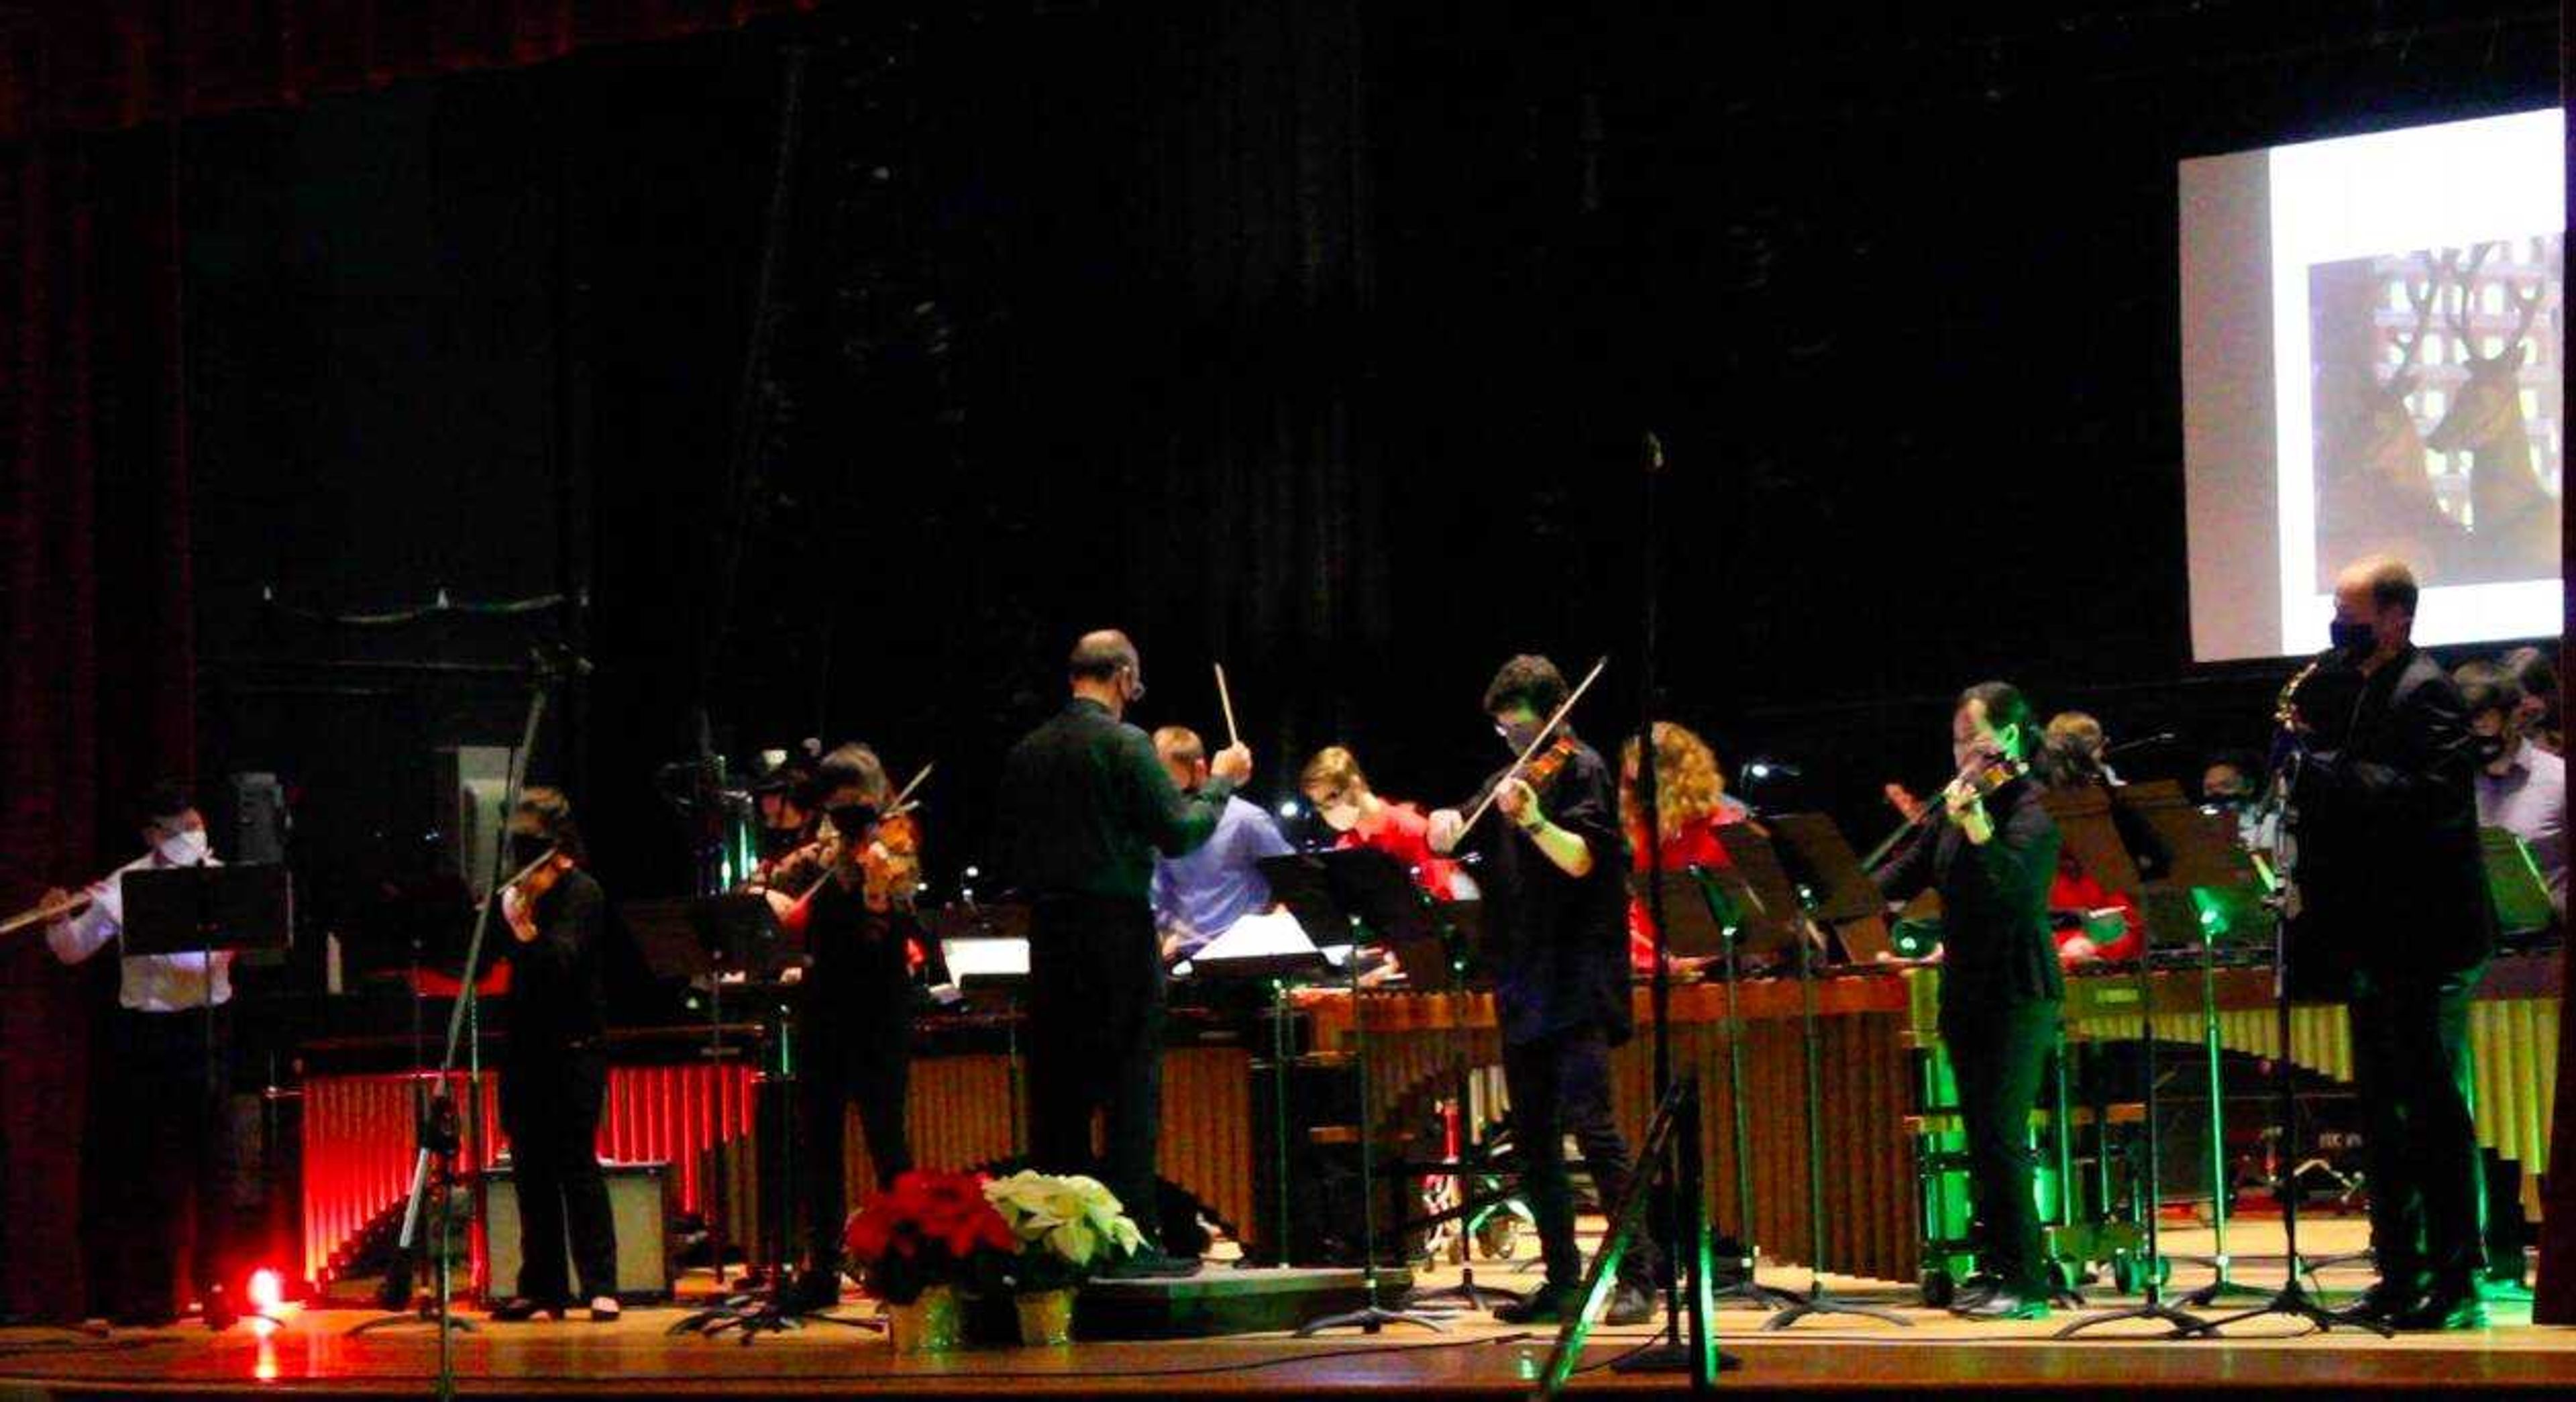 The Percussion Ensemble performs at the 13th annual Family Holiday Concert at Academic Hall Auditorium on Saturday, Nov. 21, 2020. The annual concert was accompanied by a reading of the poem “The Night Before Christmas” as well as video projections, and rice shakers were available for purchase to play along with select songs.